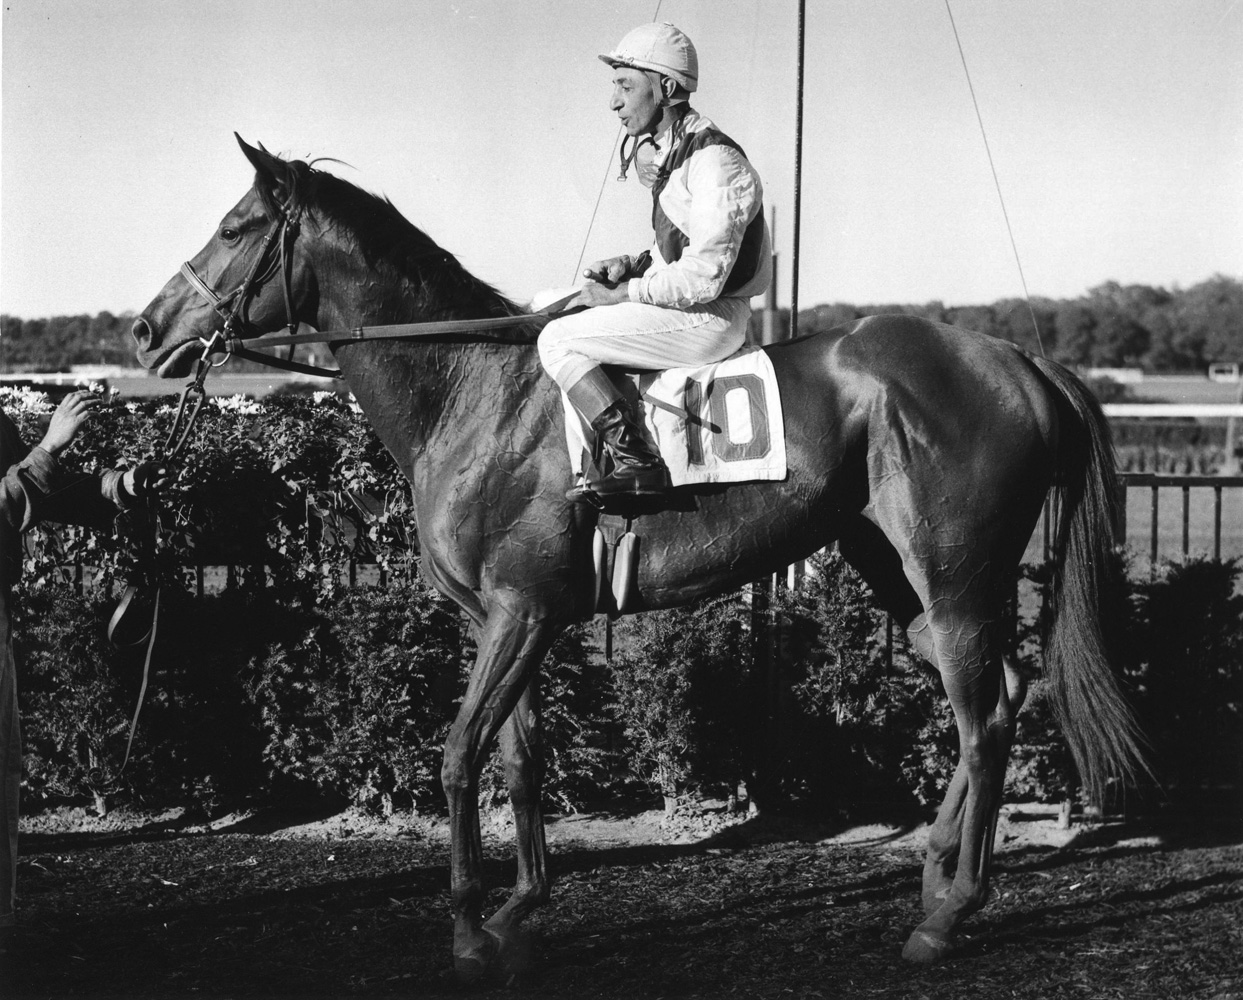 Bowl of Flowers (Eddie Arcaro up)  at Belmont Park, October 1960 (Bert and Richard Morgan/Museum Collection)